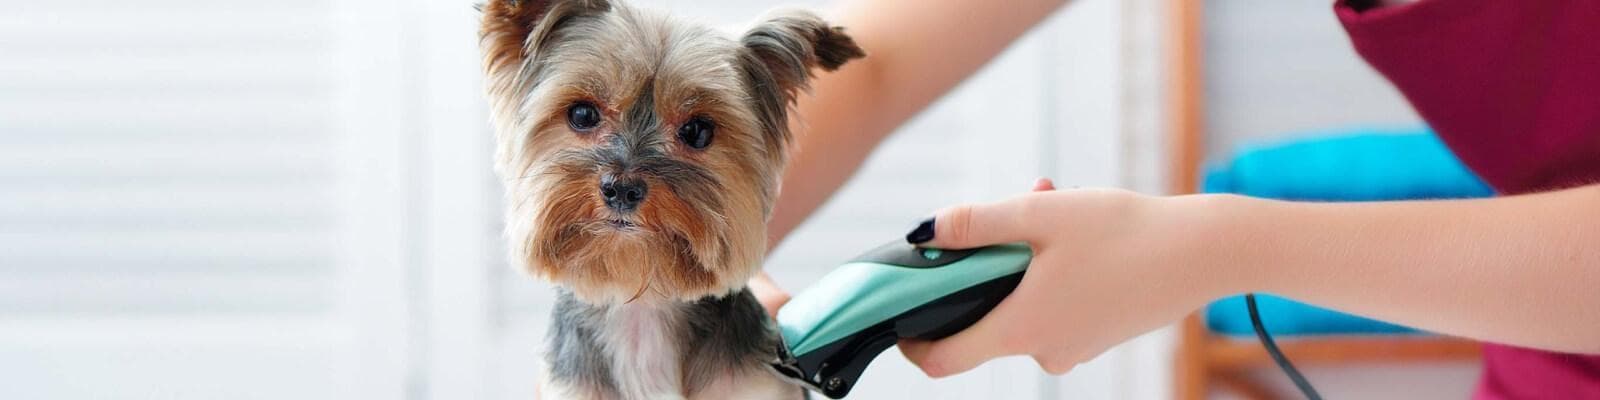 A small dog being groomed with clippers